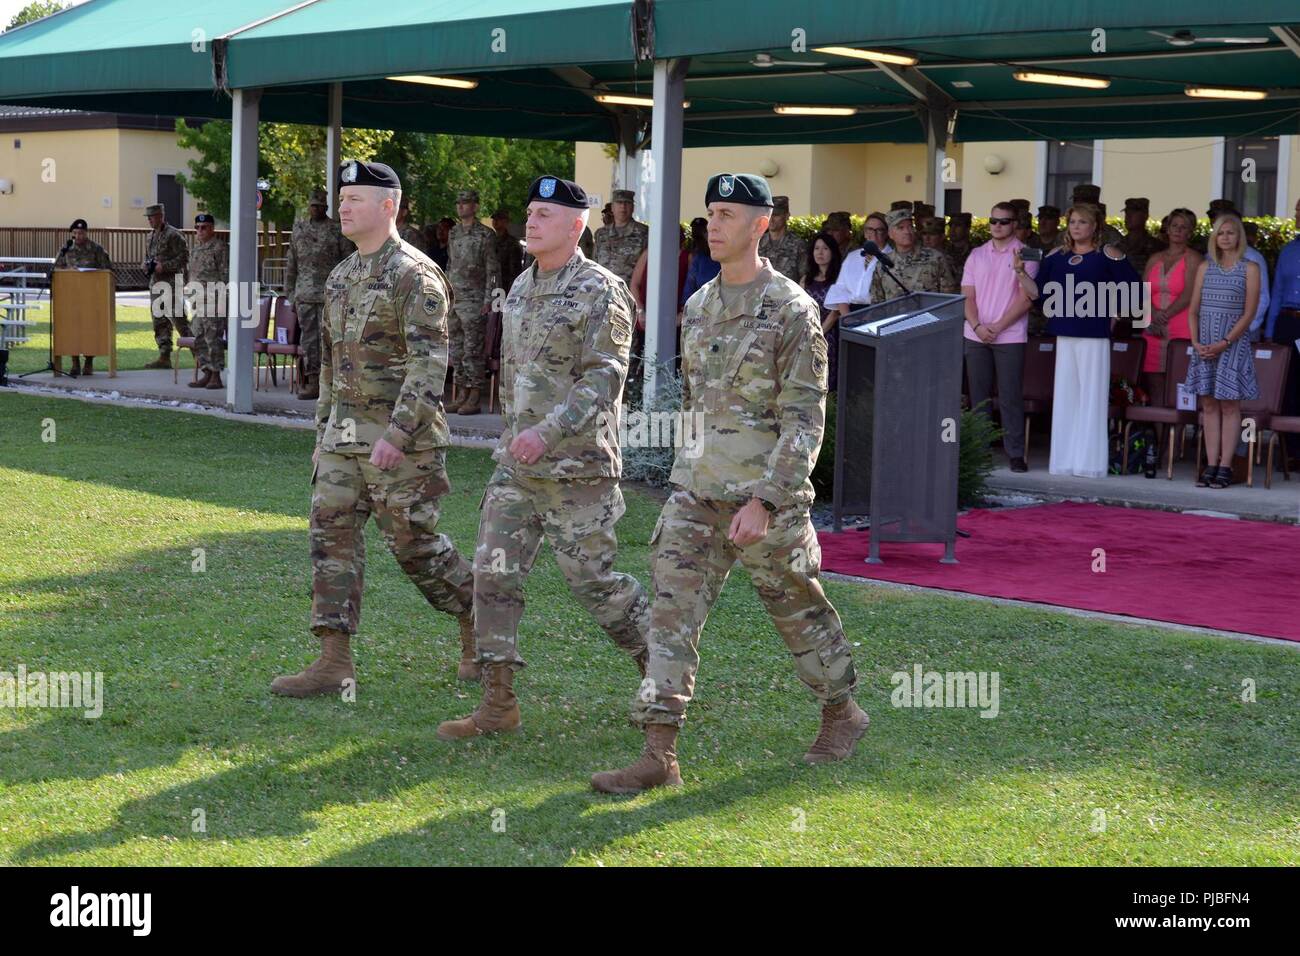 U.S. Army Africa, Brig. Gen. Eugene J. LeBoeuf, the U.S. Army Africa acting commanding general (center), Lt. Col. Marcus S. Hunter, Incoming Battalion Commander, Headquarters and Headquarters Battalion, U.S. Army Africa (left) and Lt. Col. Brett M. Medlin, outgoing Battalion Commander, Headquarters and Headquarters Battalion (right), prepare for the change of command ceremony at Caserma Ederle in Vicenza, Italy, July 12, 2018. Stock Photo